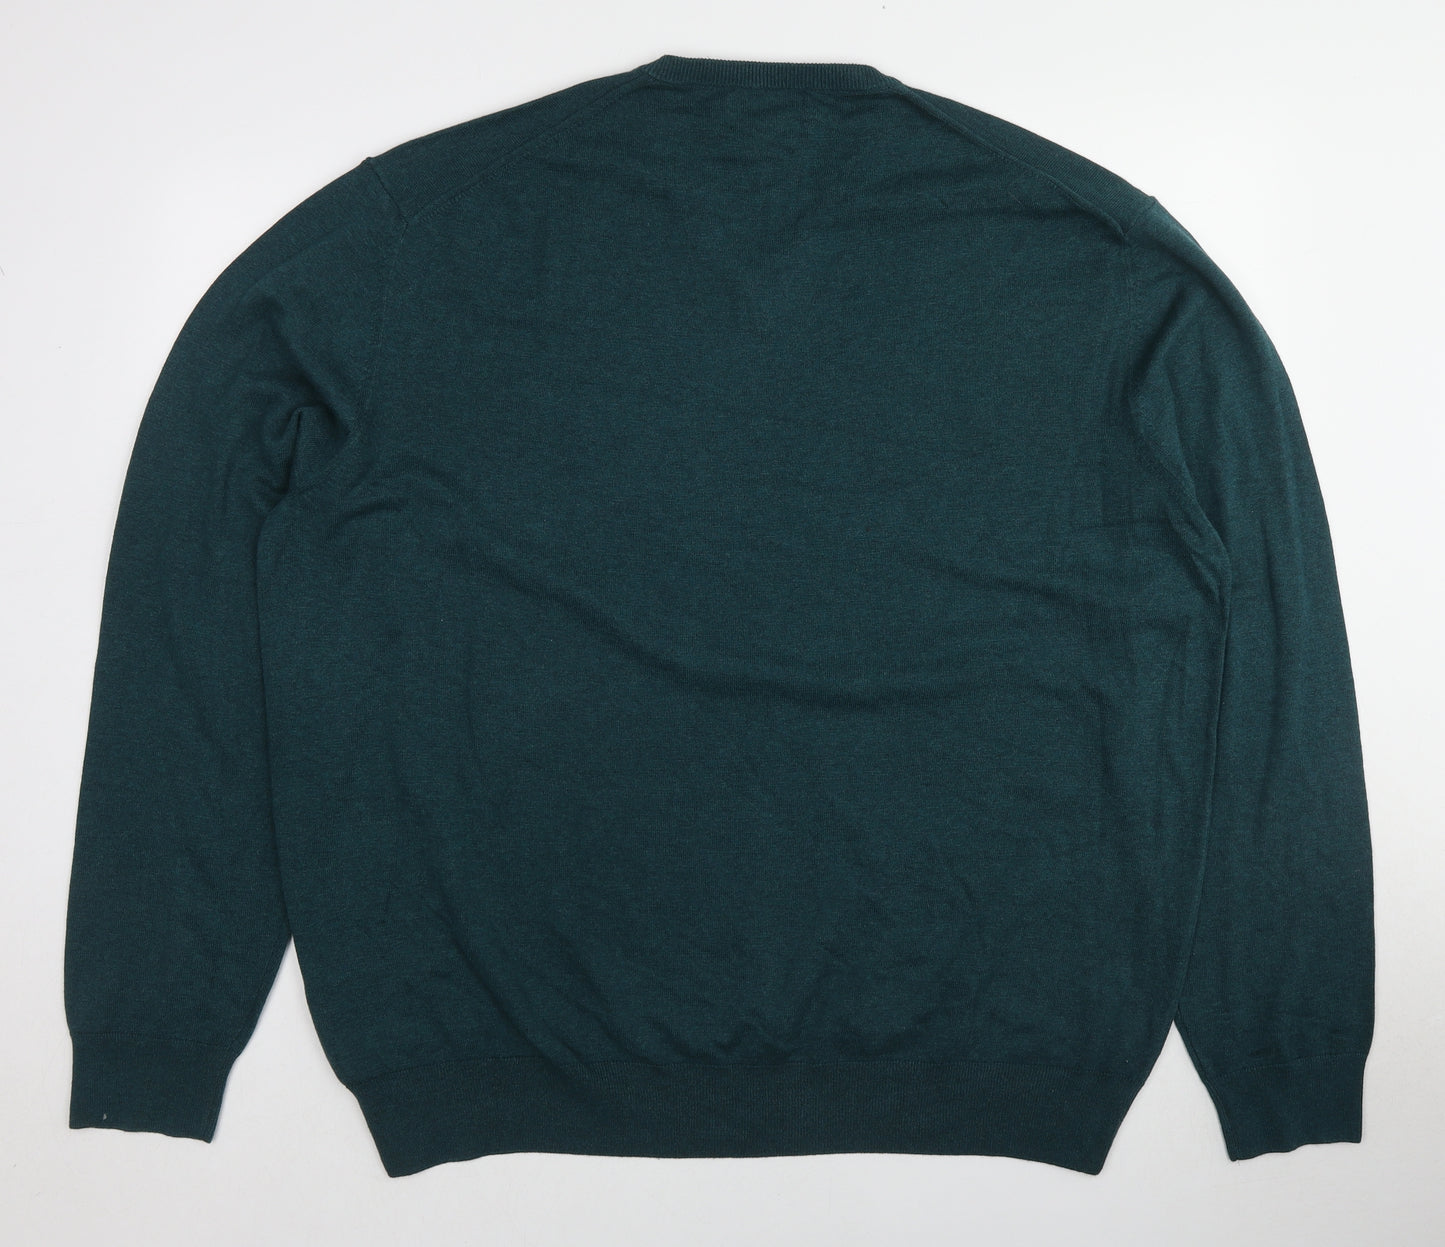 Marks and Spencer Mens Green V-Neck Cotton Pullover Jumper Size 2XL Long Sleeve